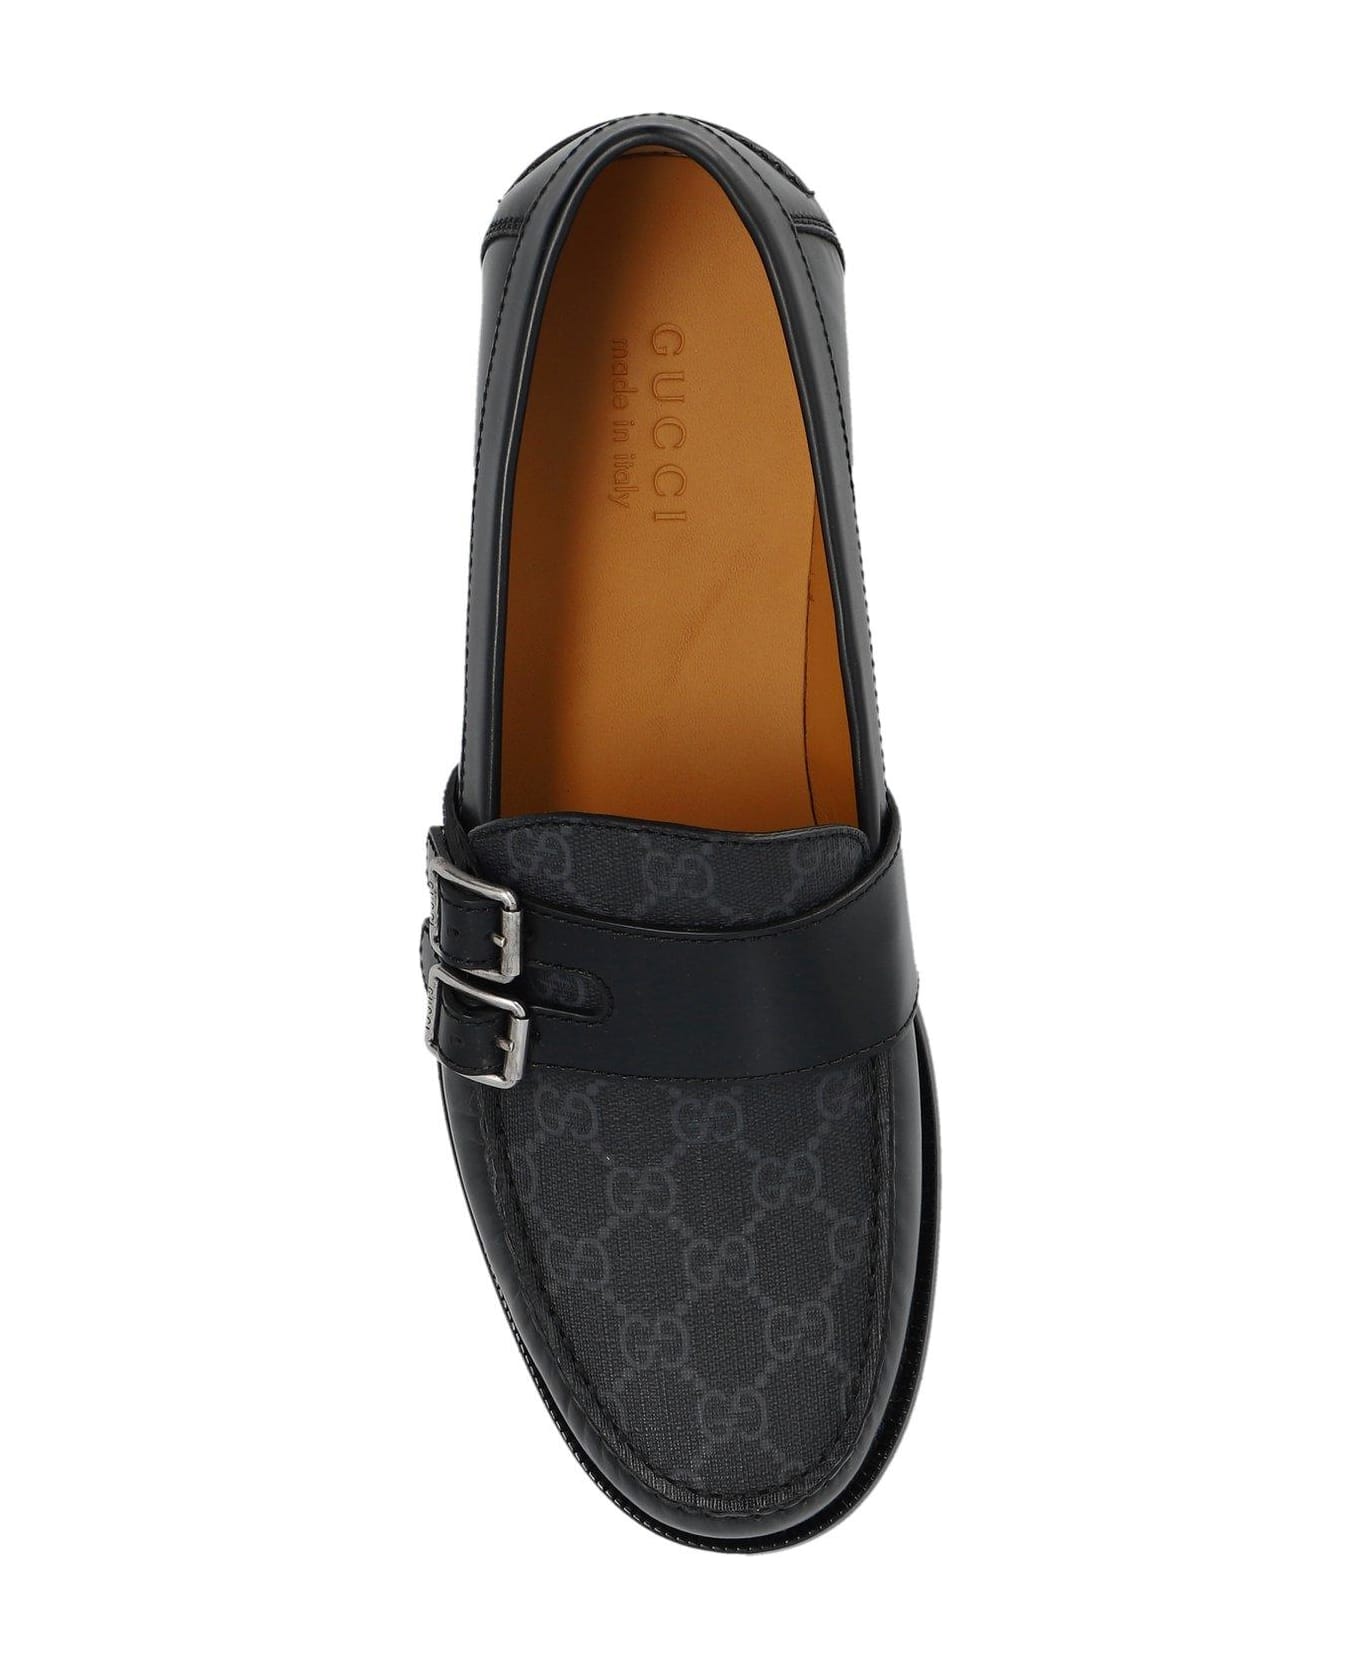 Gucci Buckle Detailed Loafers - Black